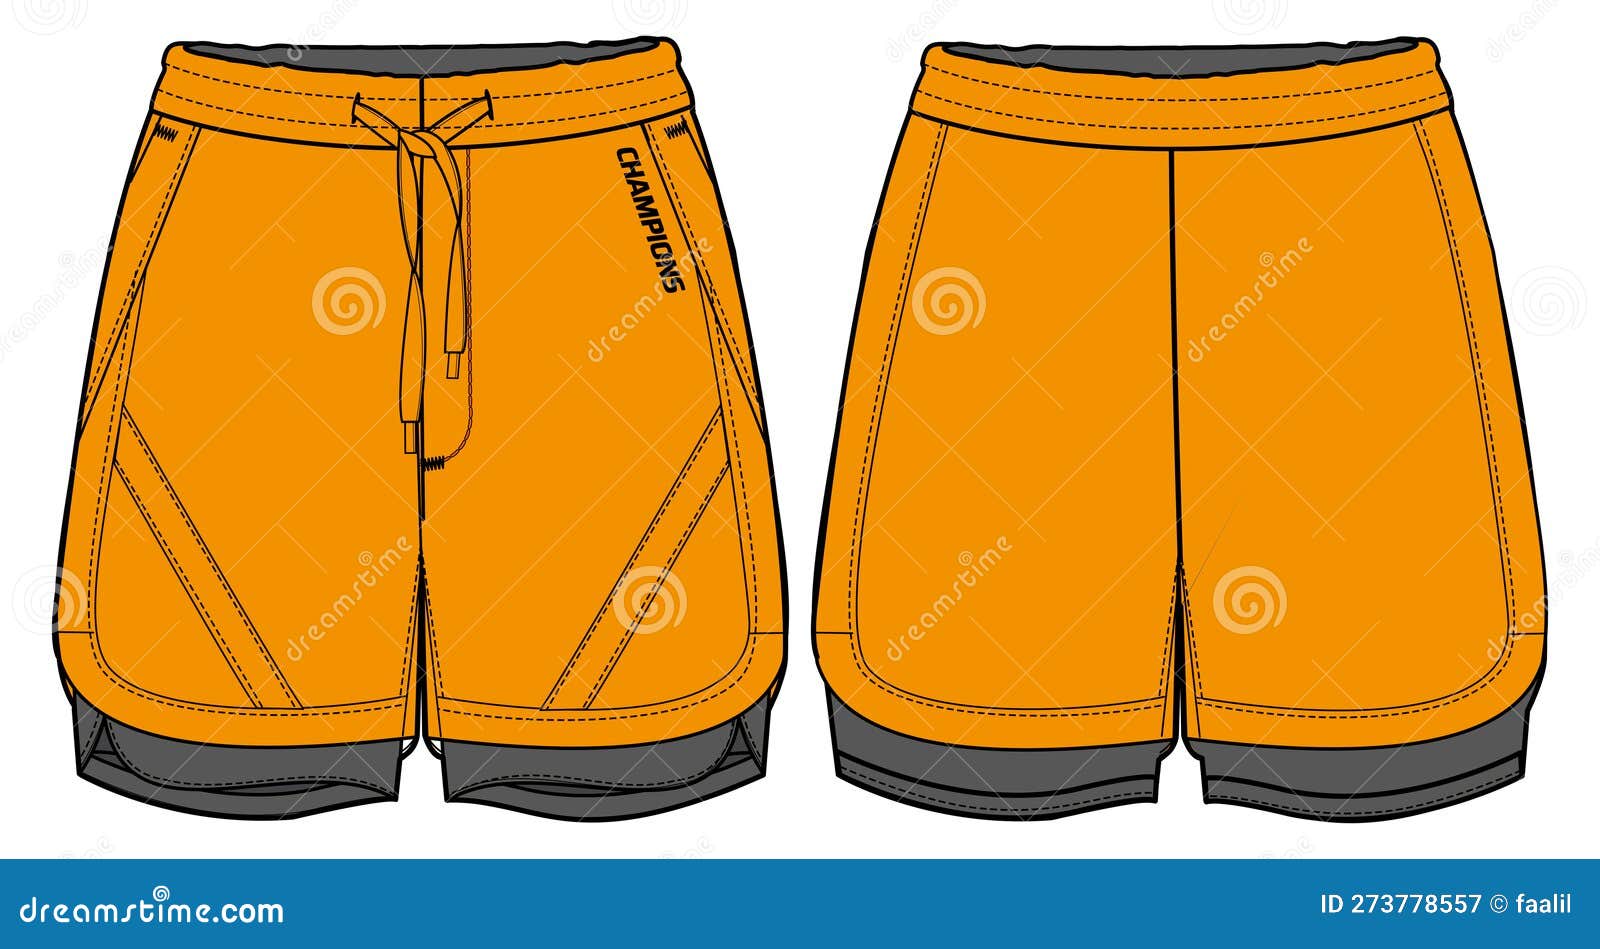 Sport Shorts With Camouflage Compression Tights Design Vector Template Basketball  Shorts Concept With Front And Back View For Soccer Football Badminton And  Running Active Wear Shorts Design Stock Illustration - Download Image